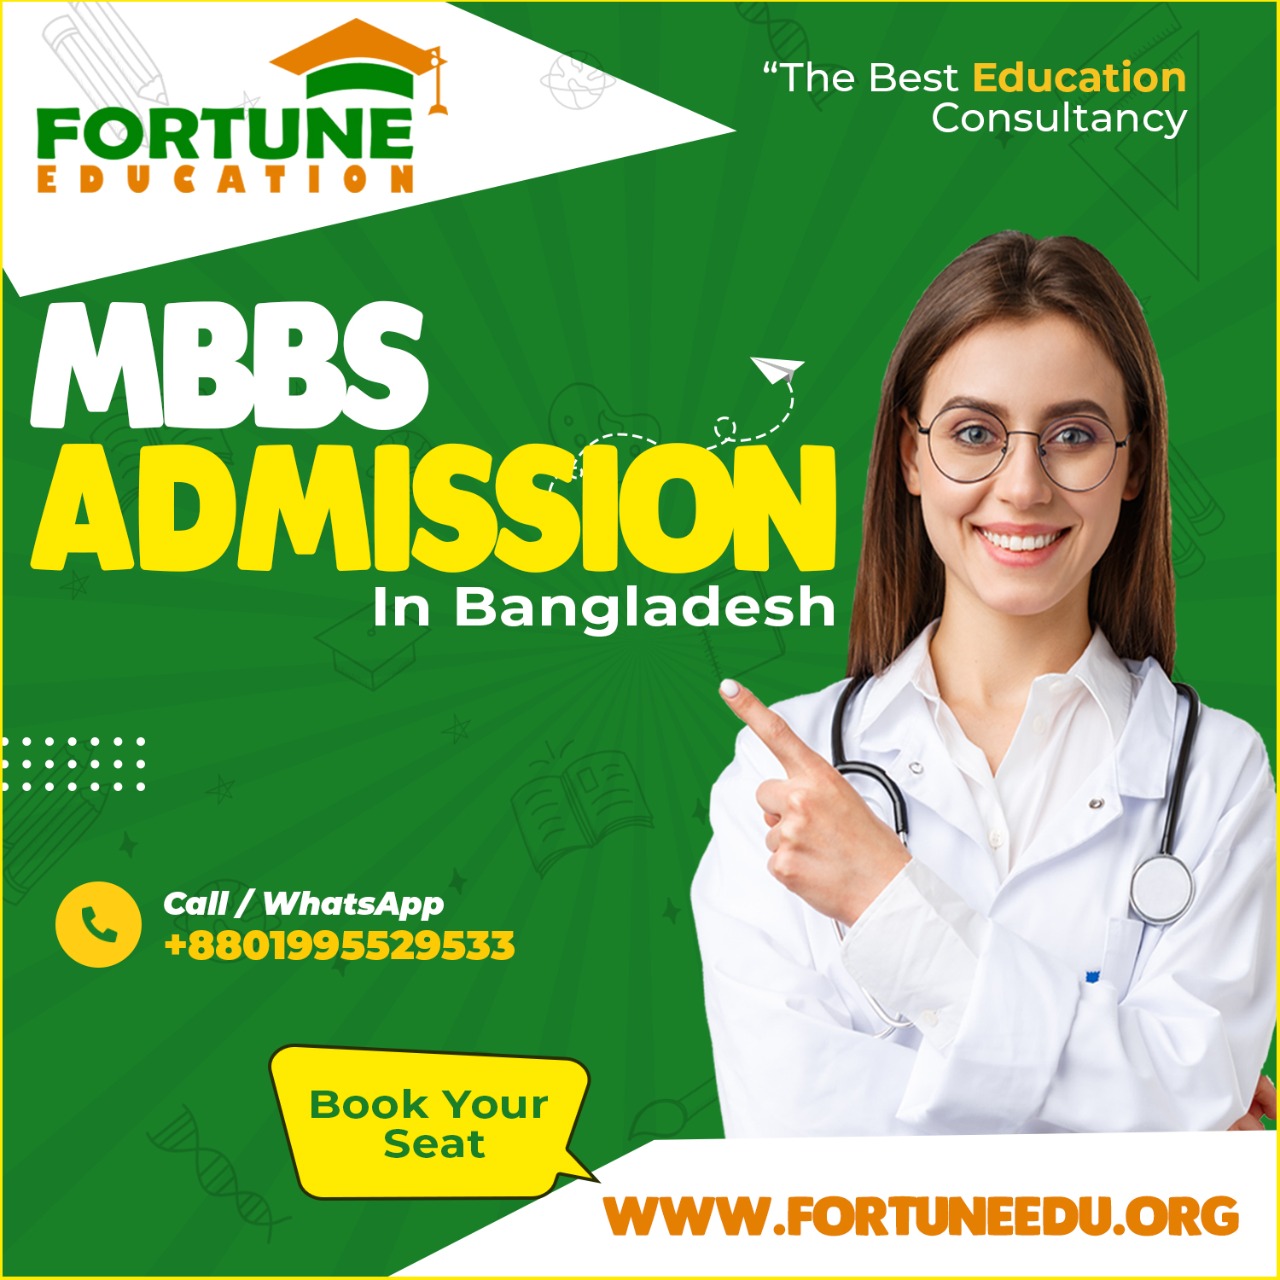 MBBS Admission in Bangladesh for International students